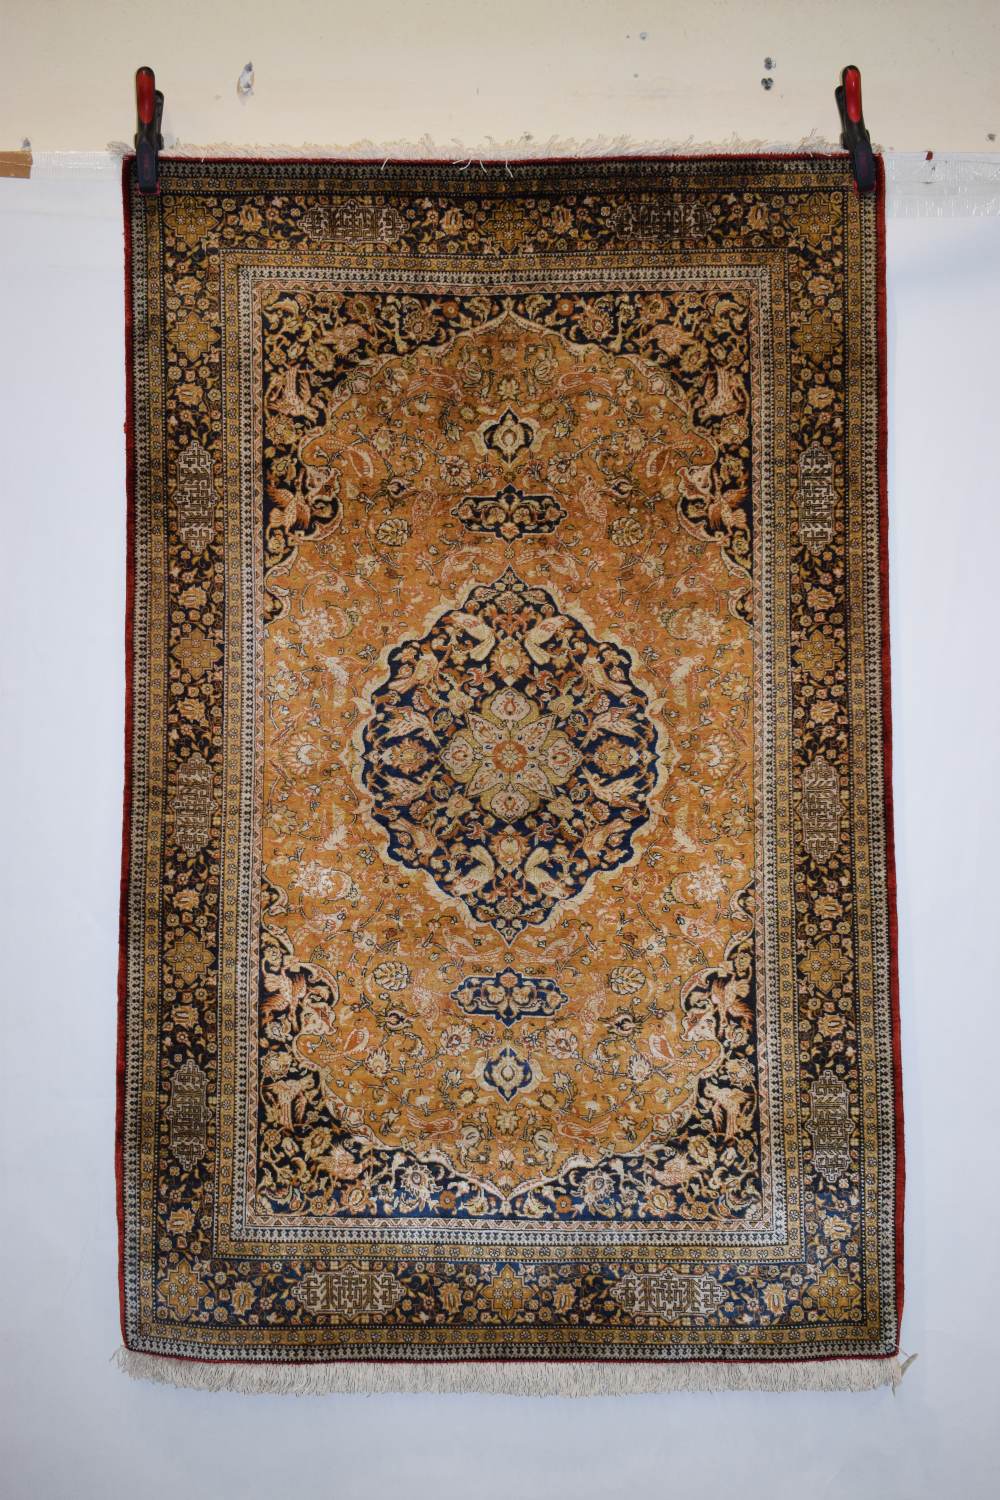 Silk Qum rug, central Persia, mid-20th century, 5ft. 5in. X 3ft. 6in. 1.65m. X 1.07m. Pale gold - Image 3 of 8